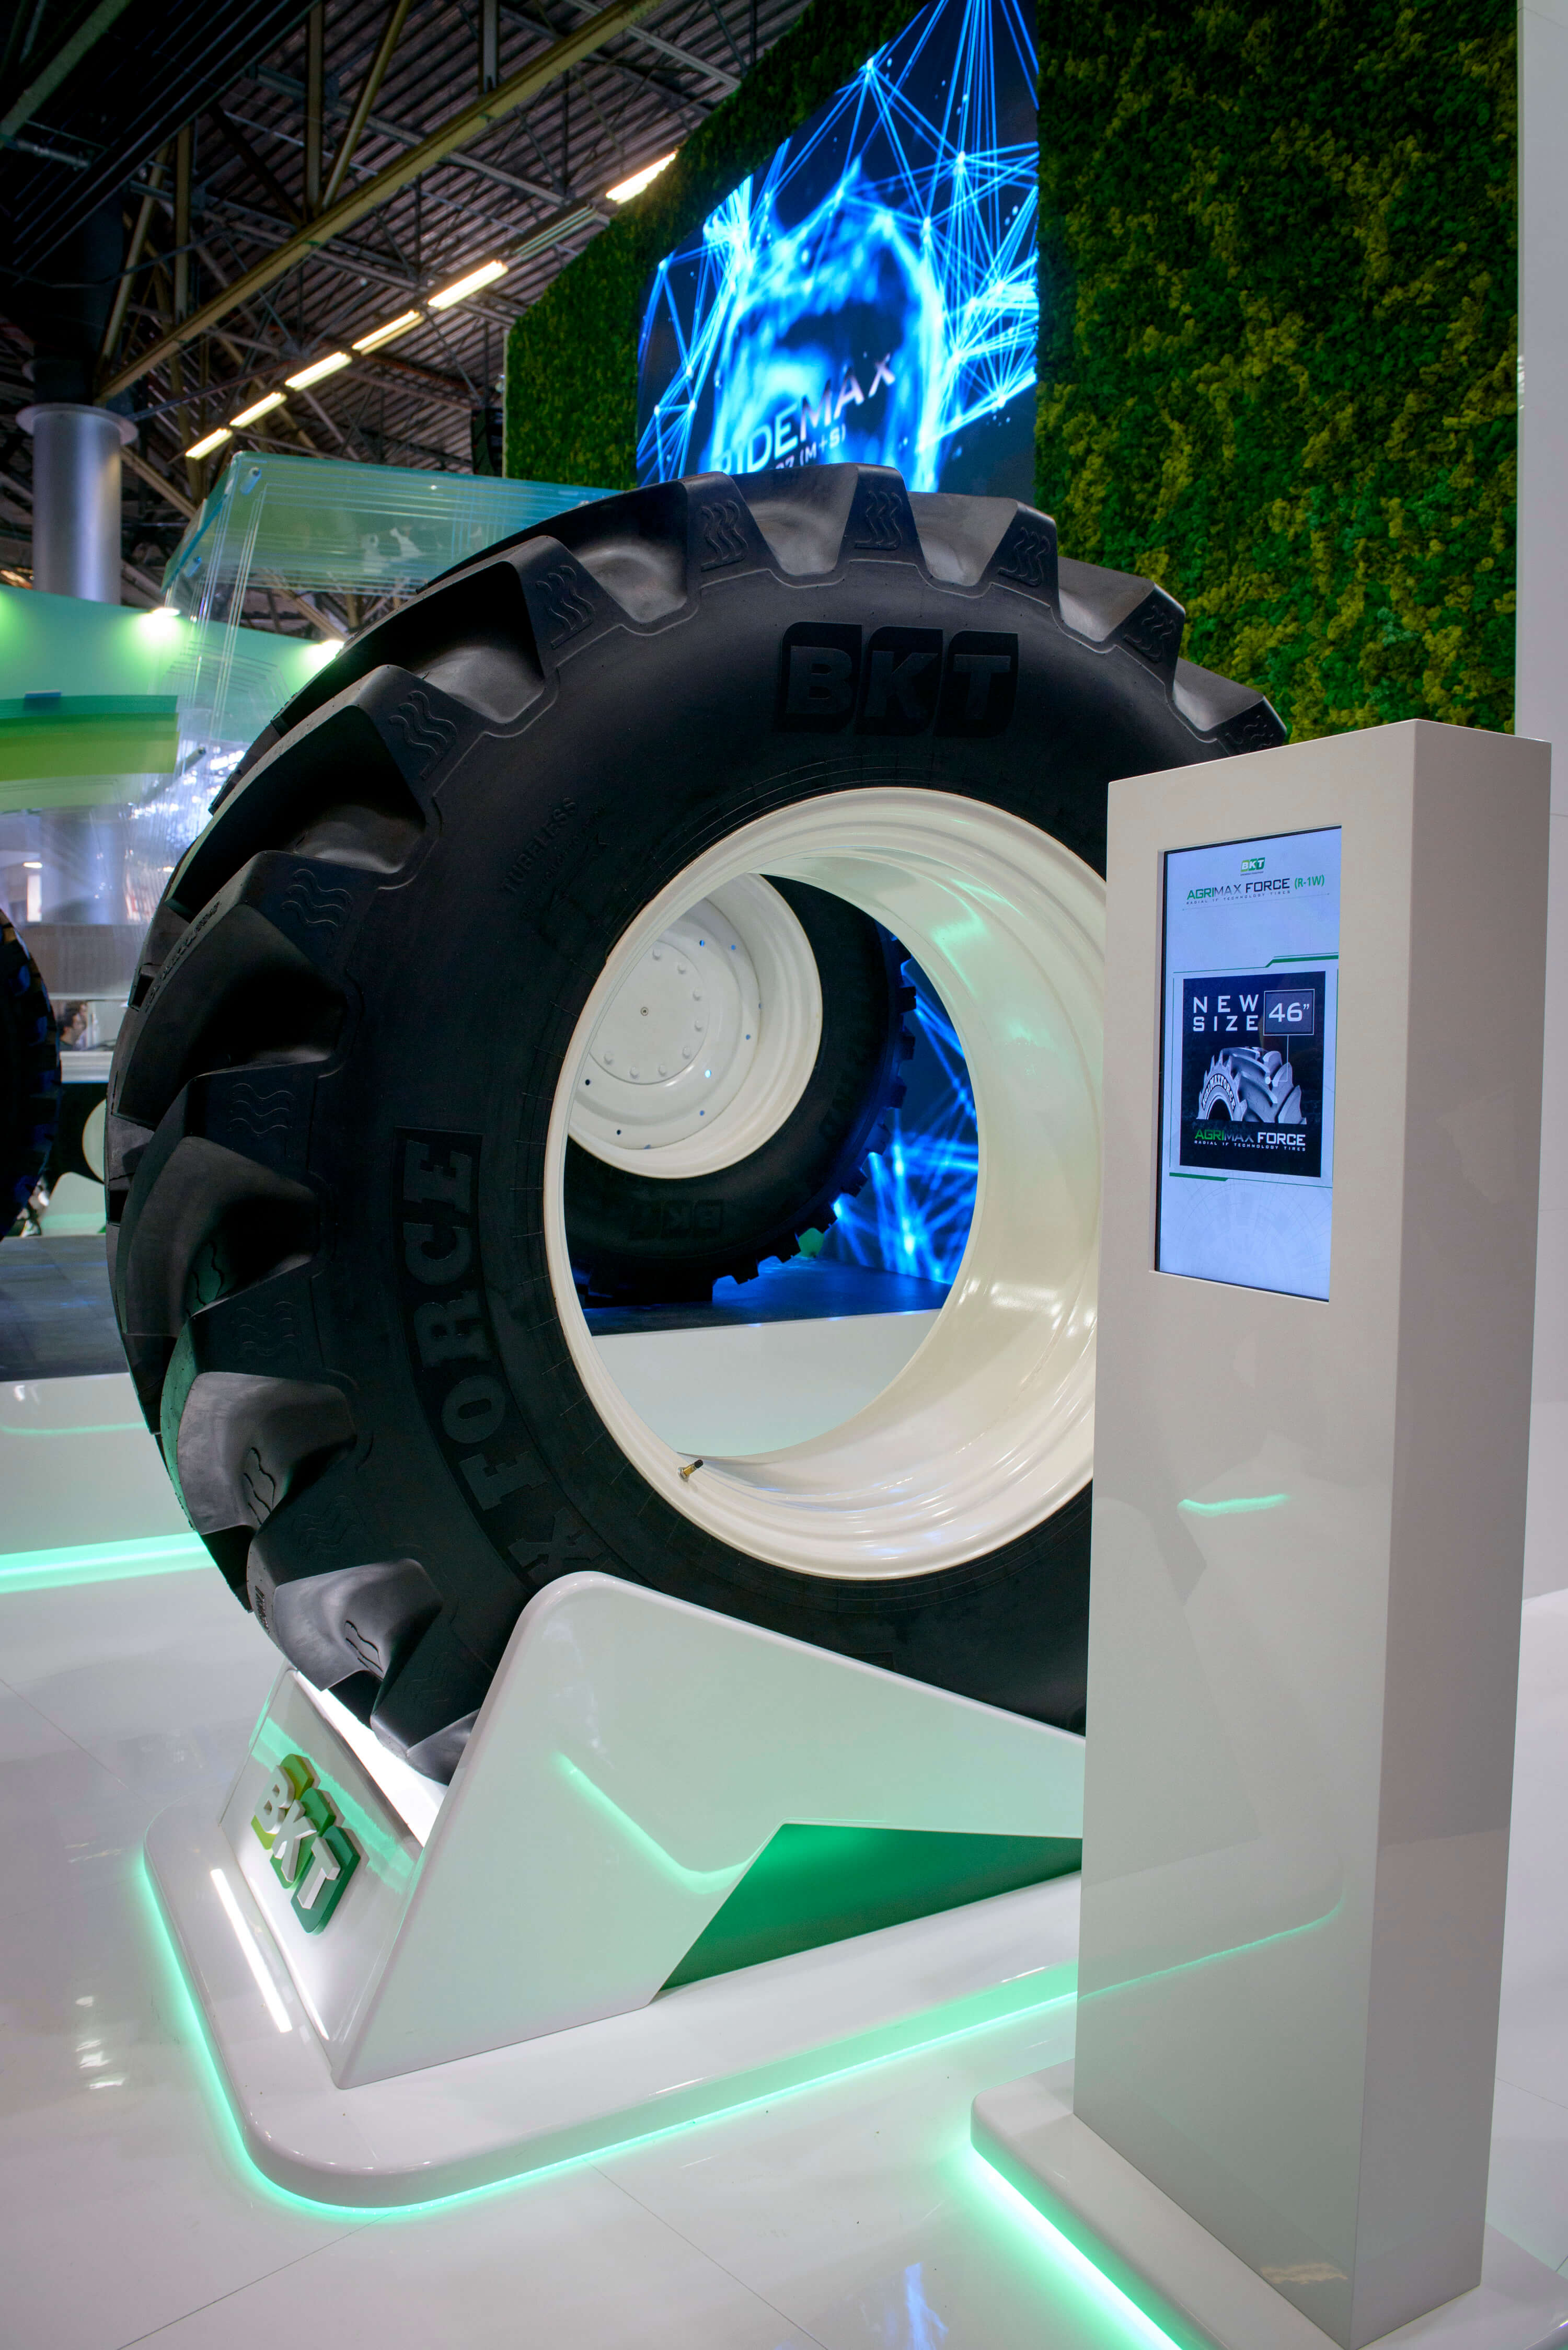 Say hello to BKT’s biggest radial agriculture tire! 3